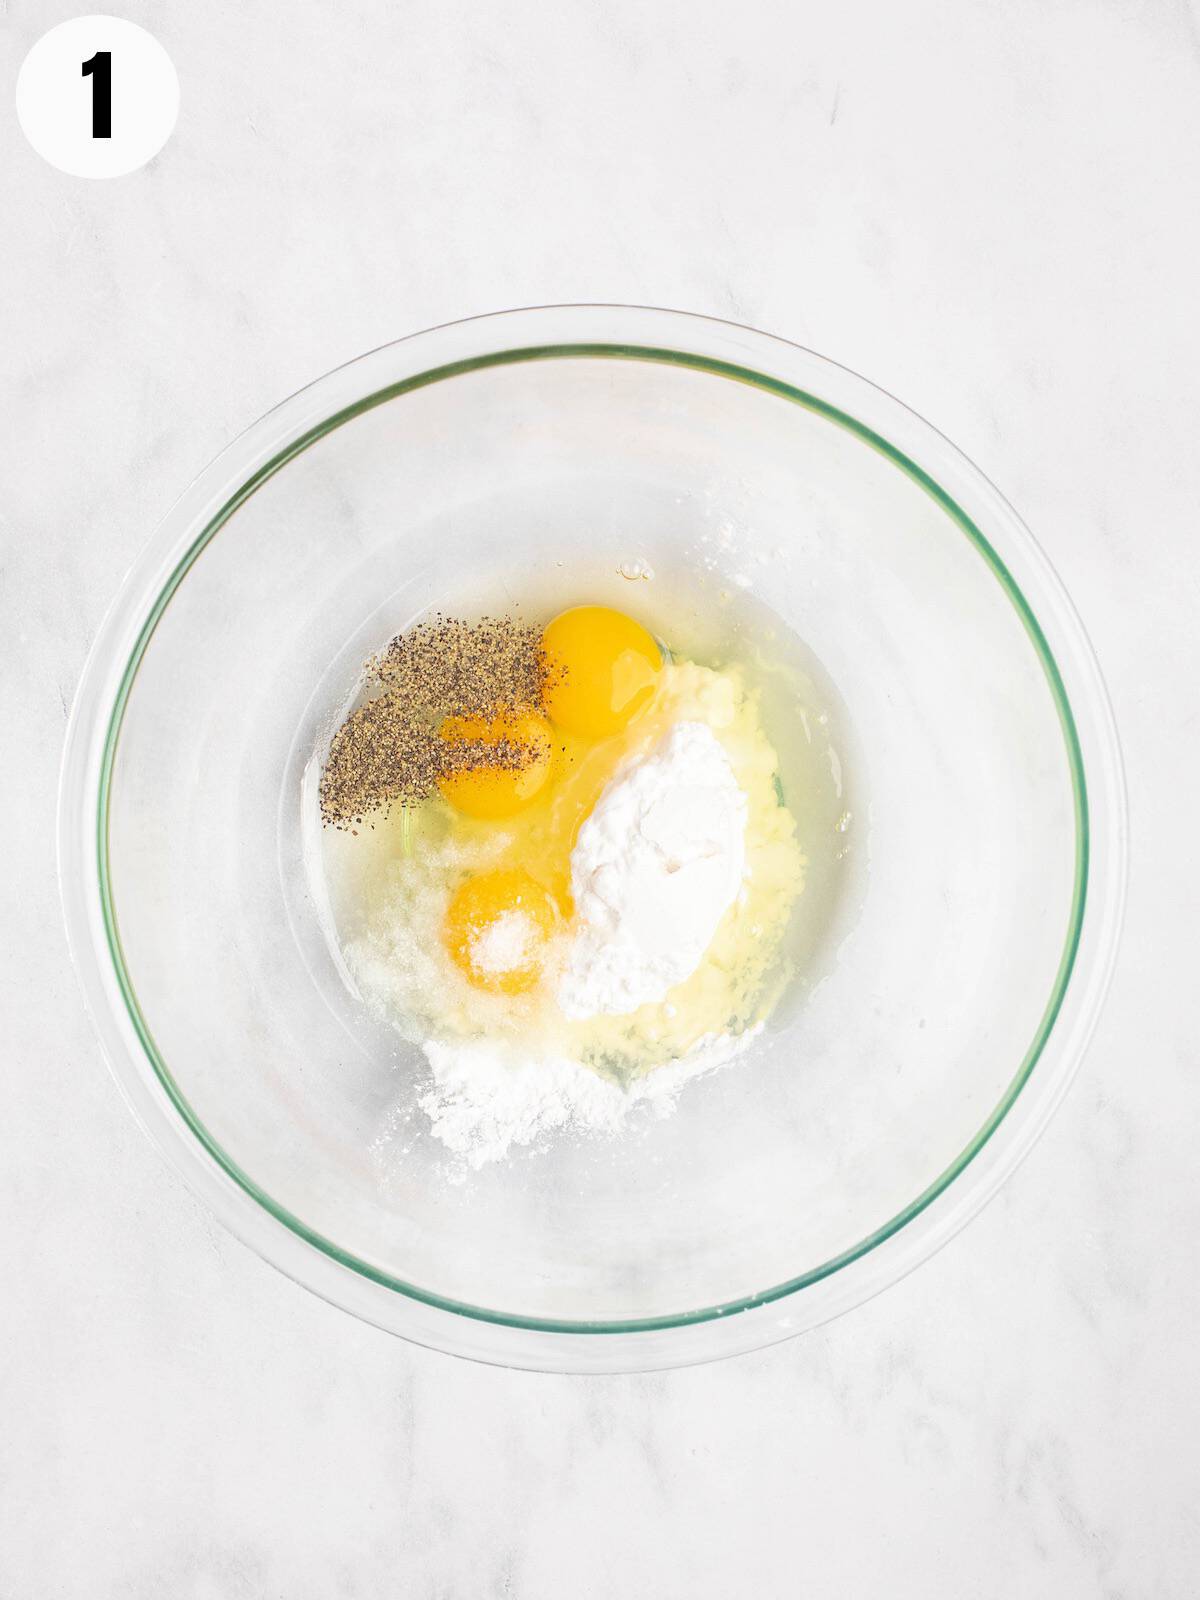 Eggs, seasonings, and potato starch in a mixing bowl.